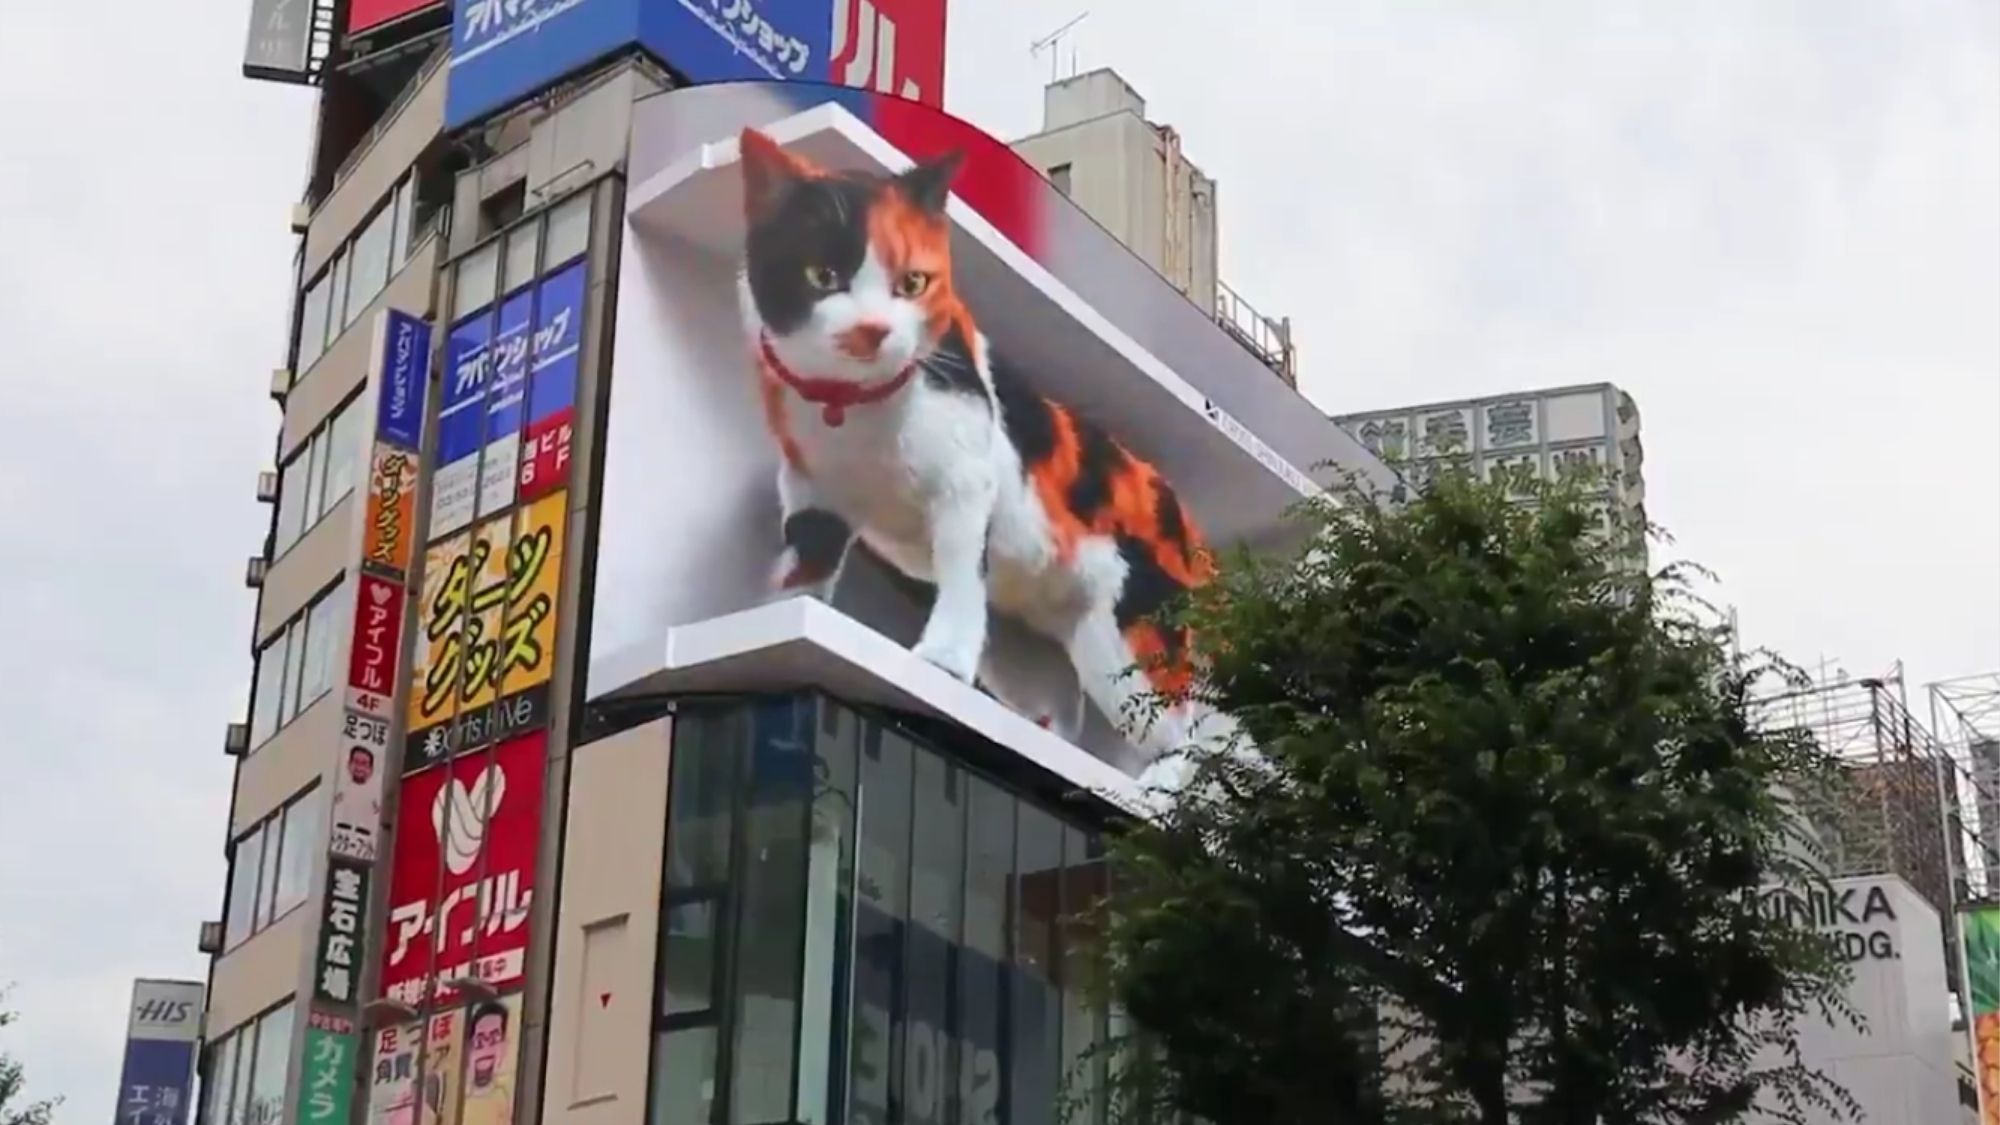 Another reason to visit Japan!  Huge 3D cat amazes passersby in Tokyo’s Shibuya Crossing captured from @cross_s_vision, twitter